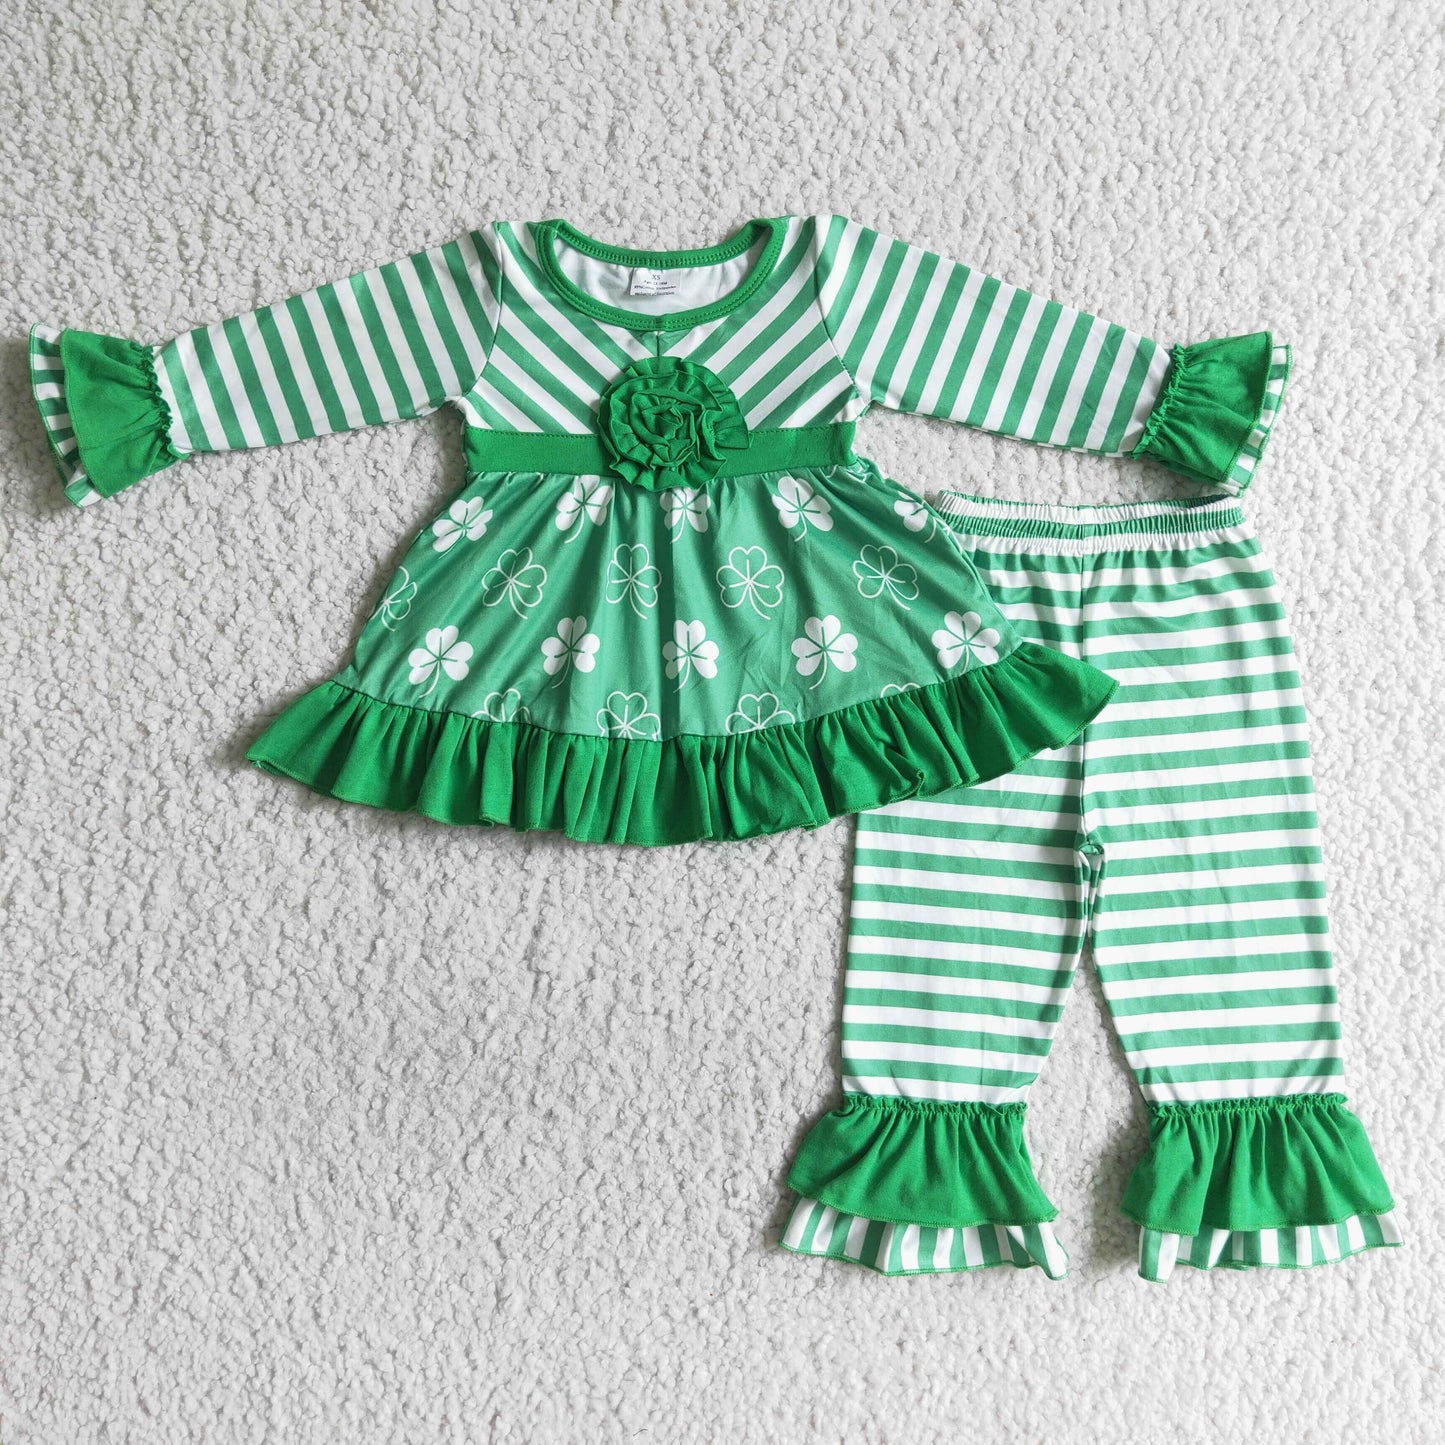 Clover tunic green stripe pants girls St Patrick's Day clothes